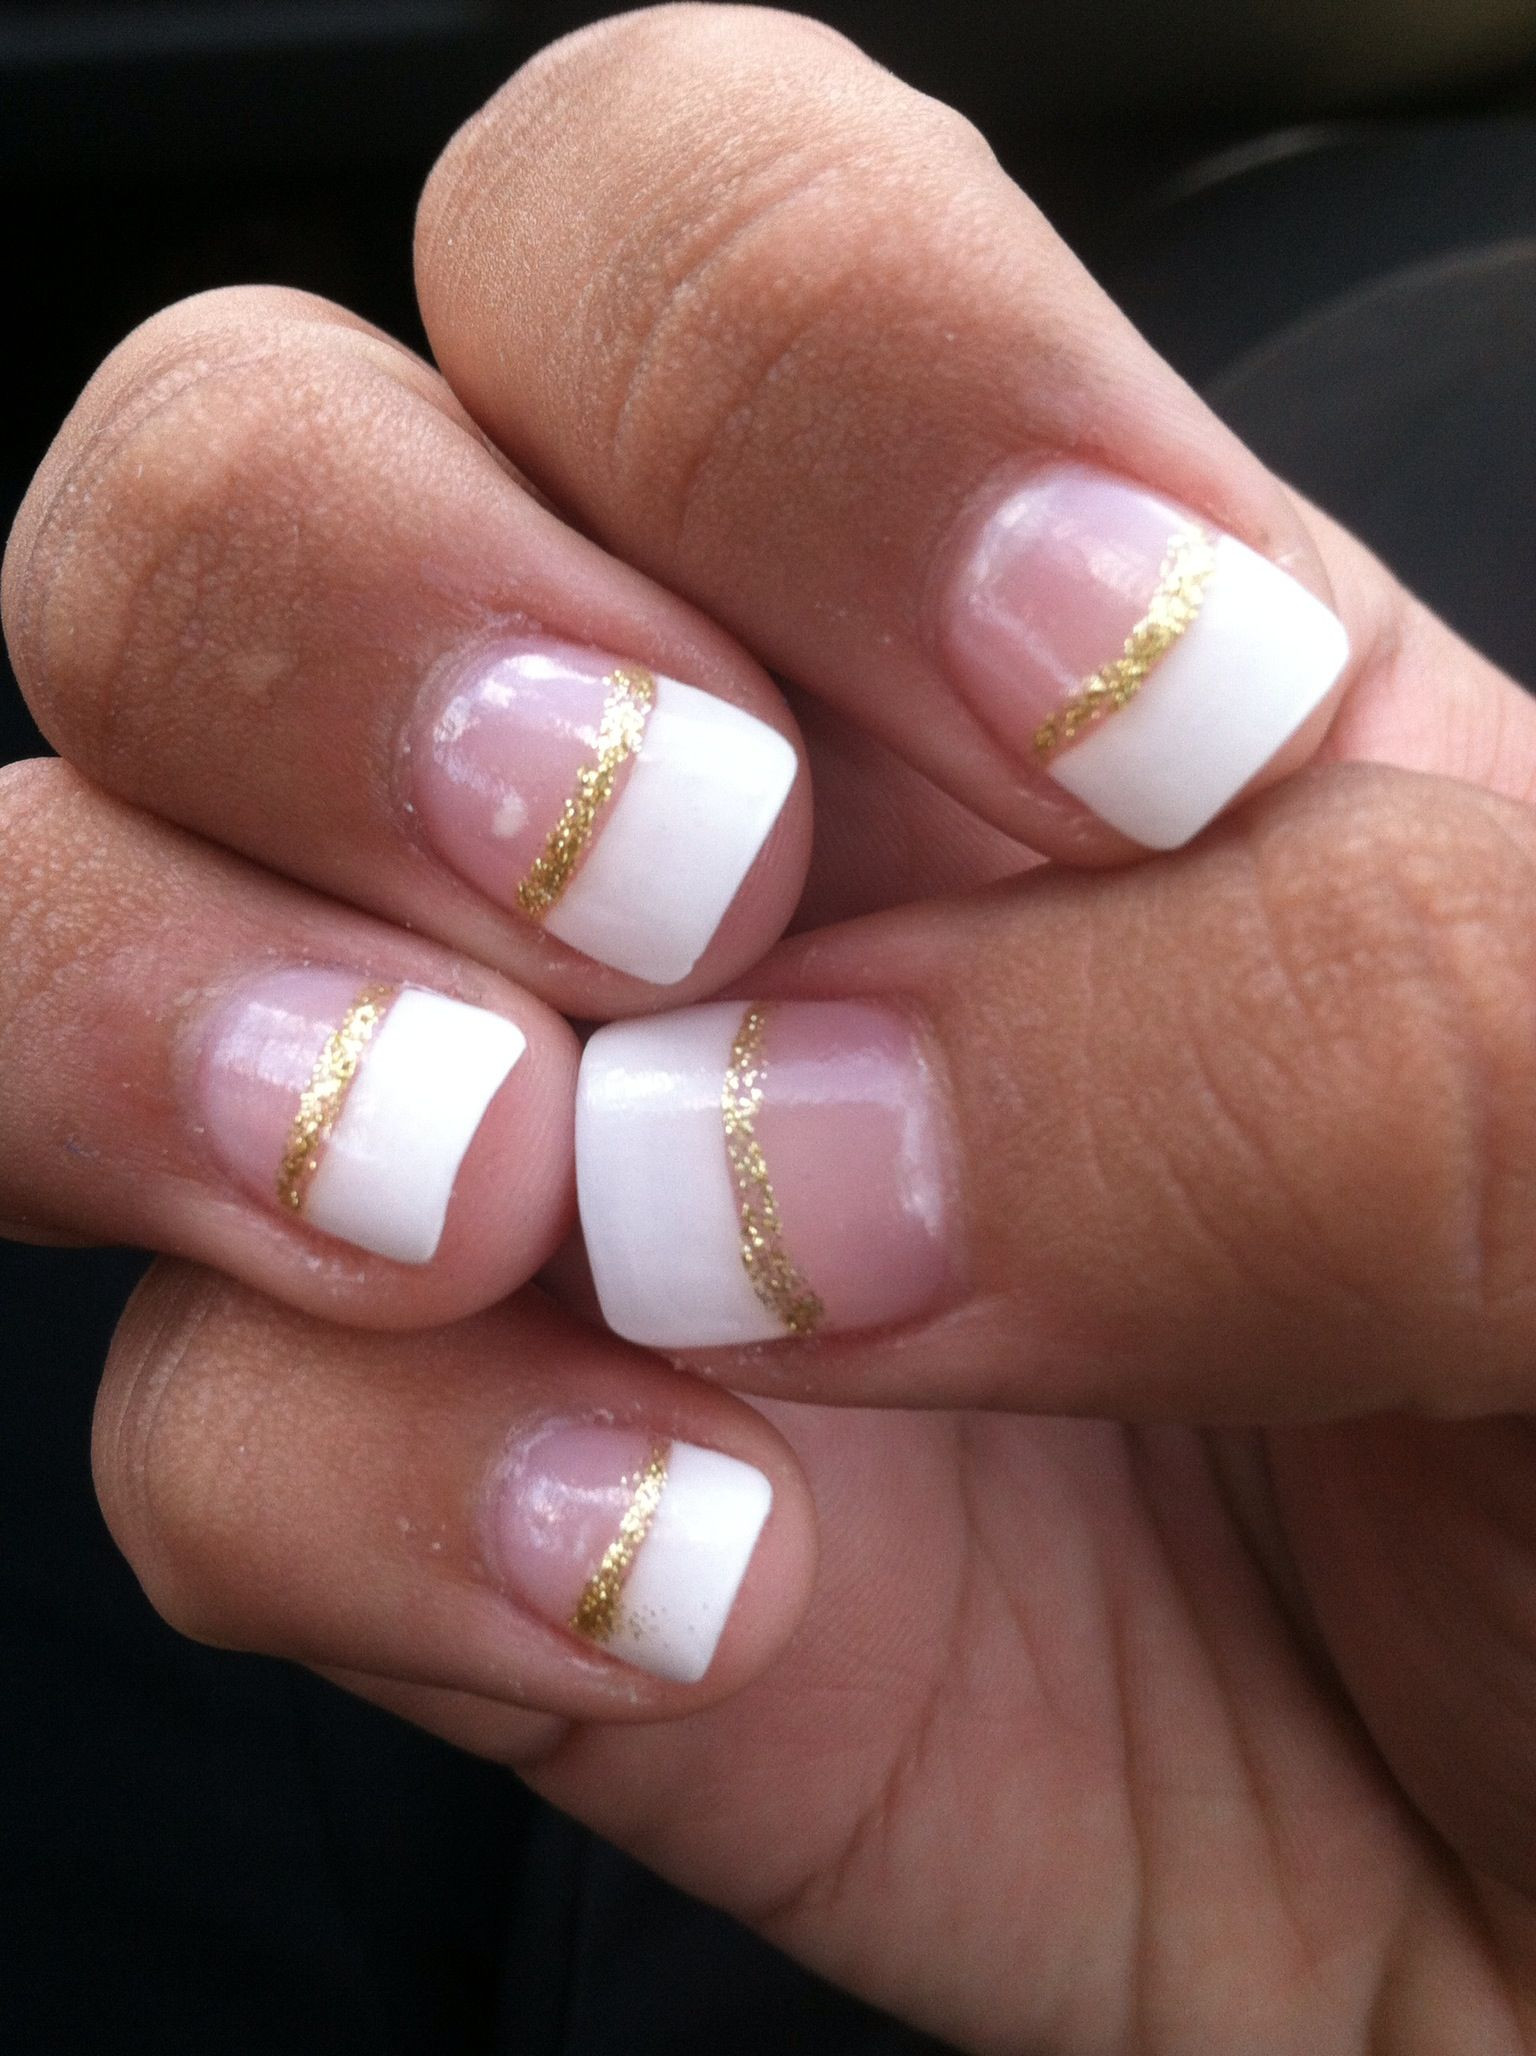 Gold Glitter Tips Nails
 White French tip with gold glitter manicure